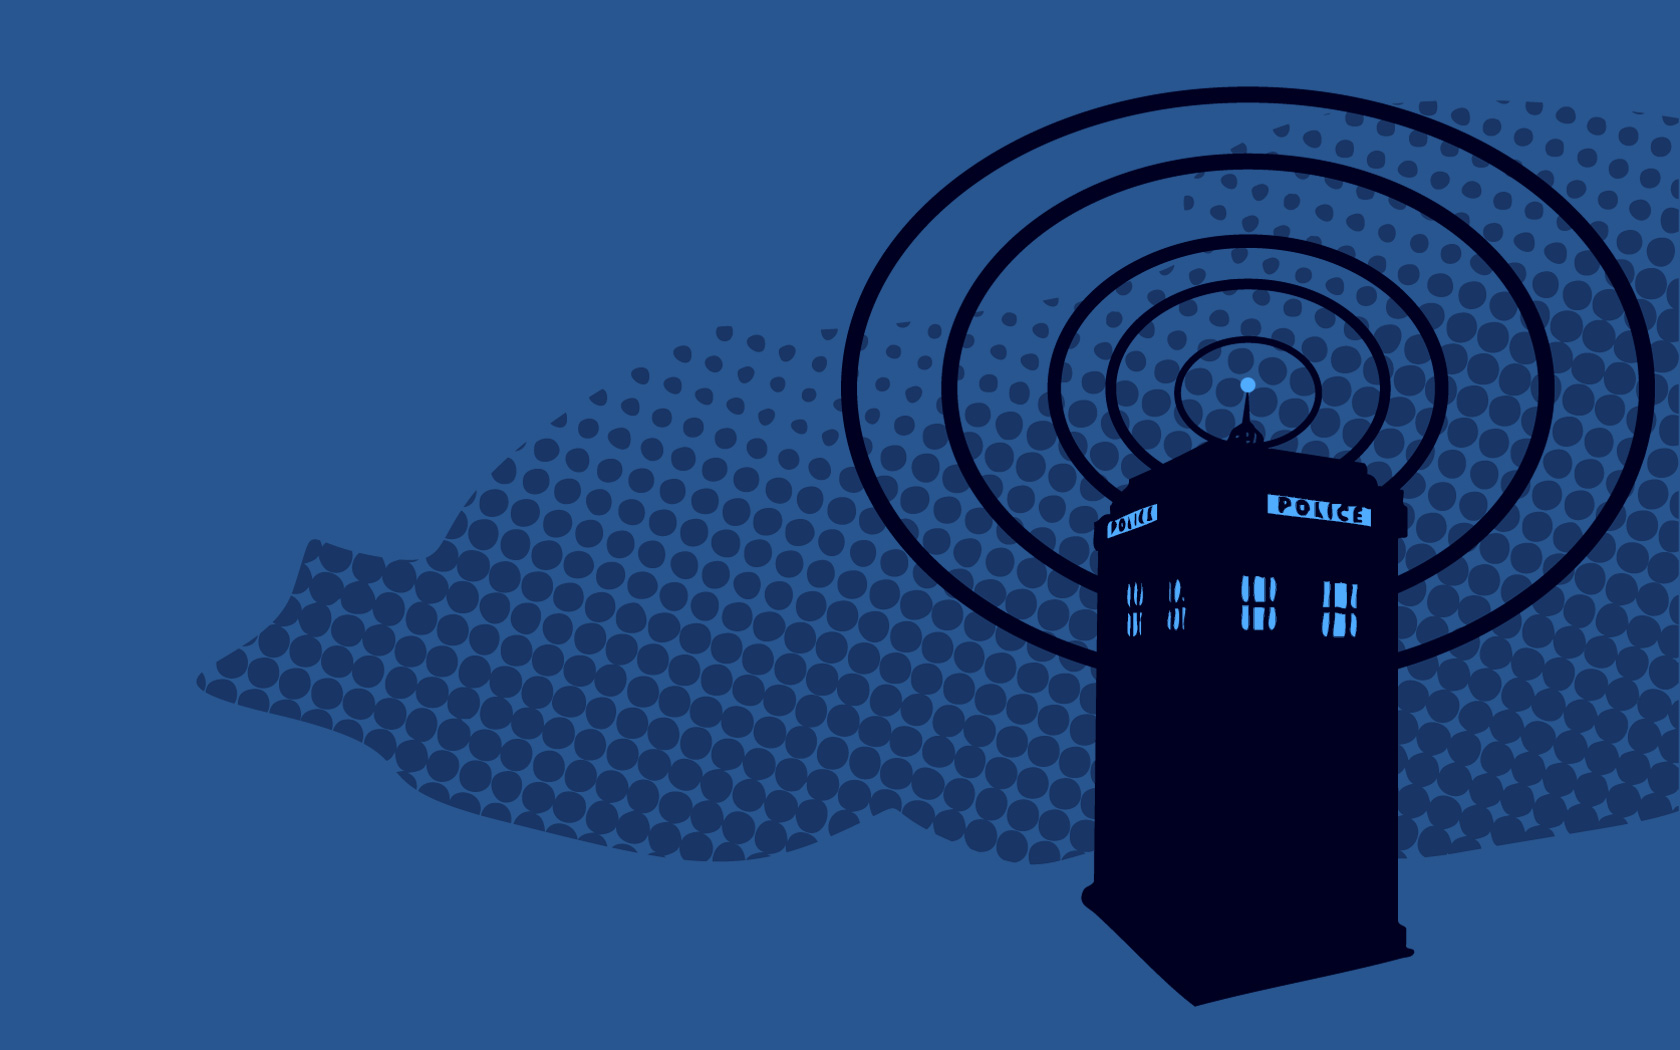 Doctor Who Wallpapers Backgrounds A1